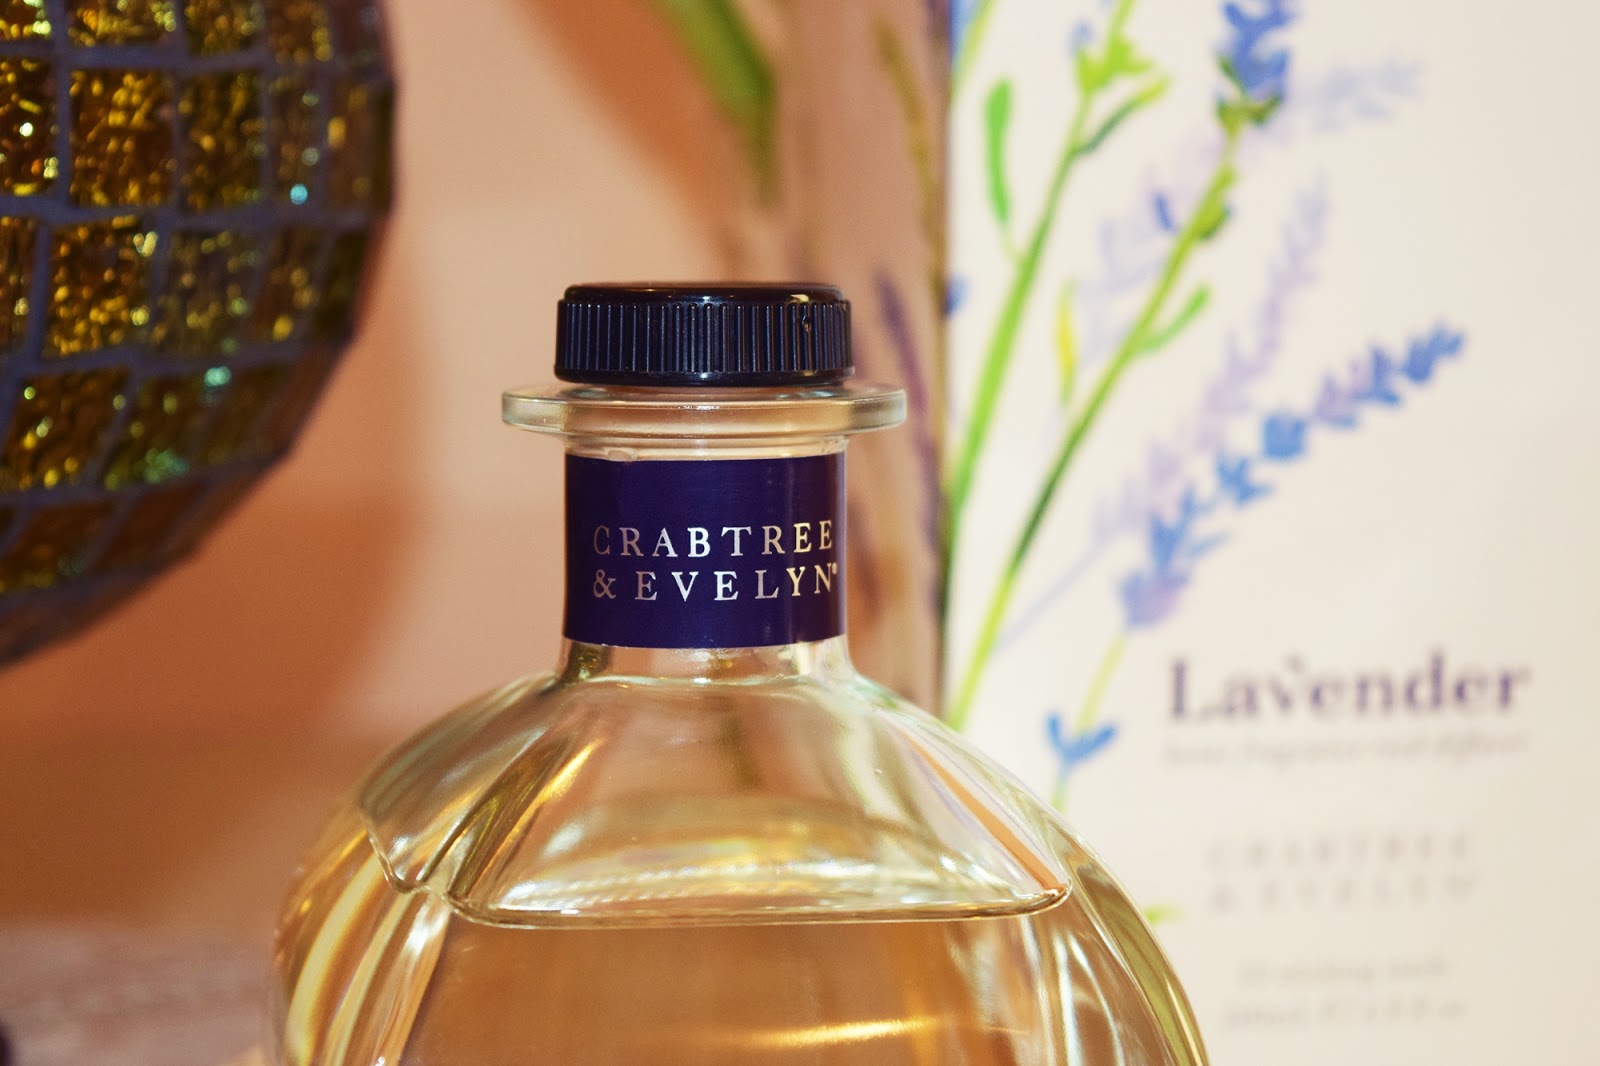 Crabtree & Evelyn Lavender Reed Diffuser